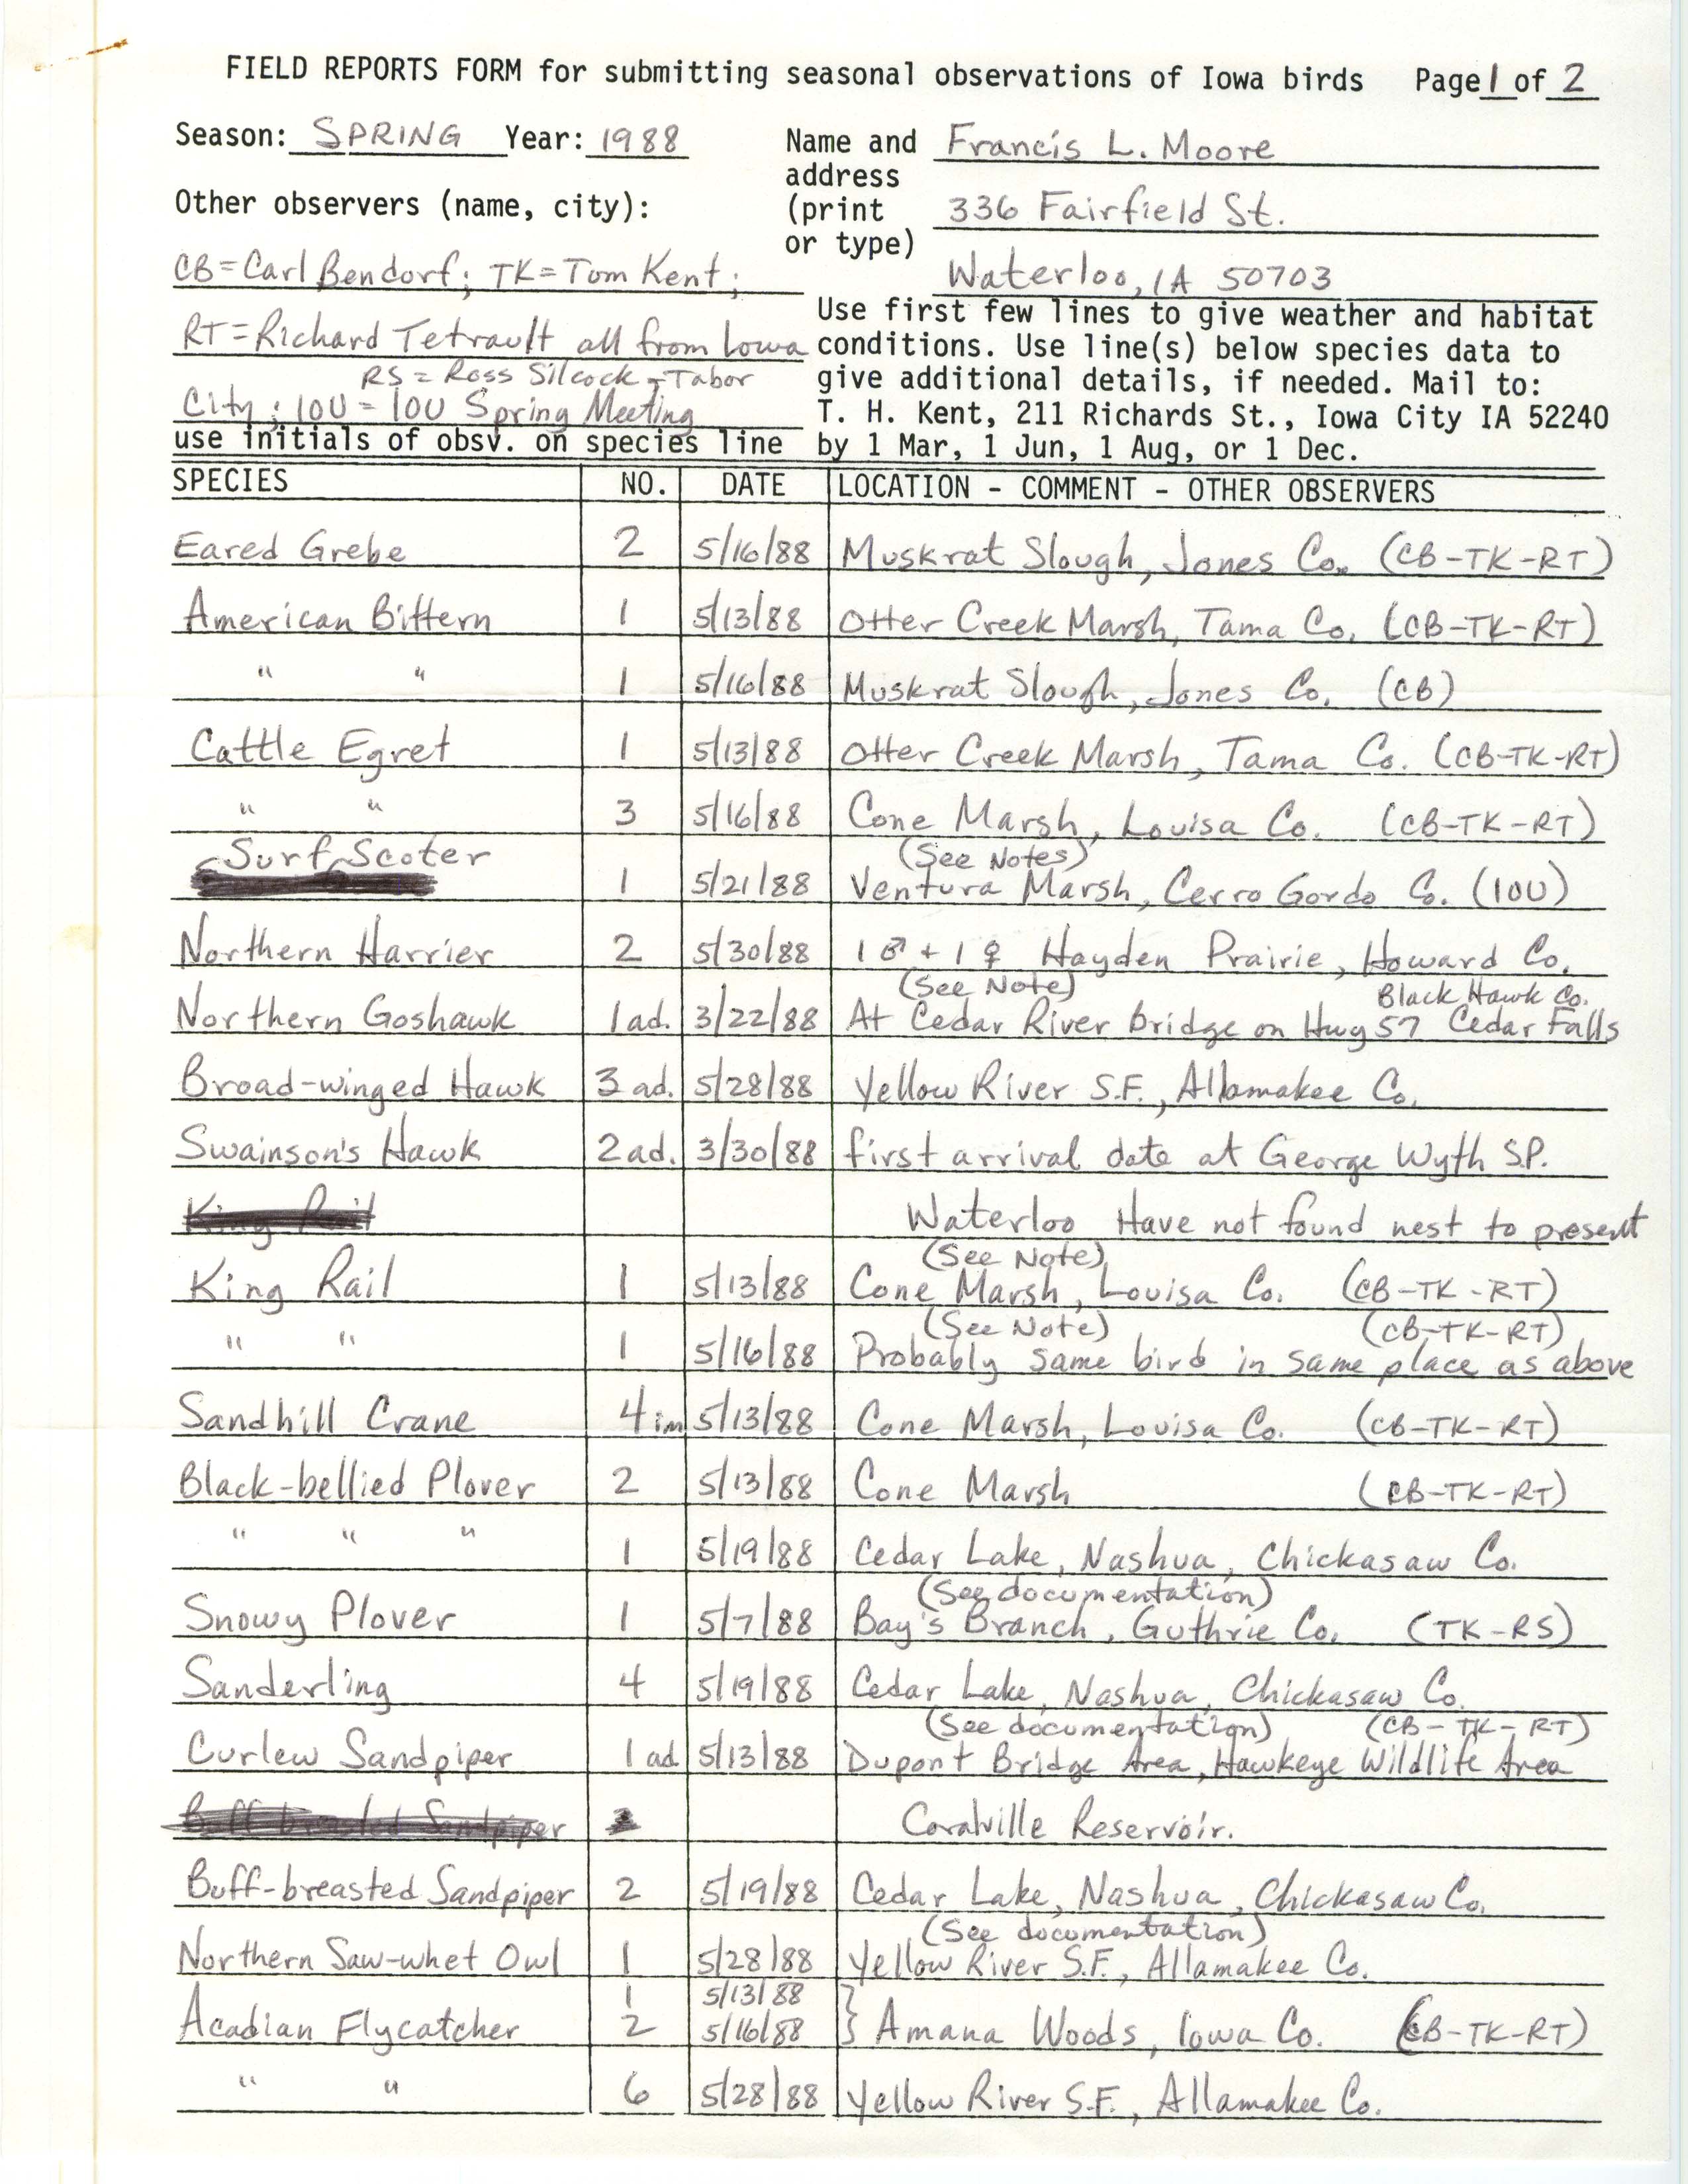 Field reports form for submitting seasonal observations of Iowa birds, Francis L. Moore, spring 1988